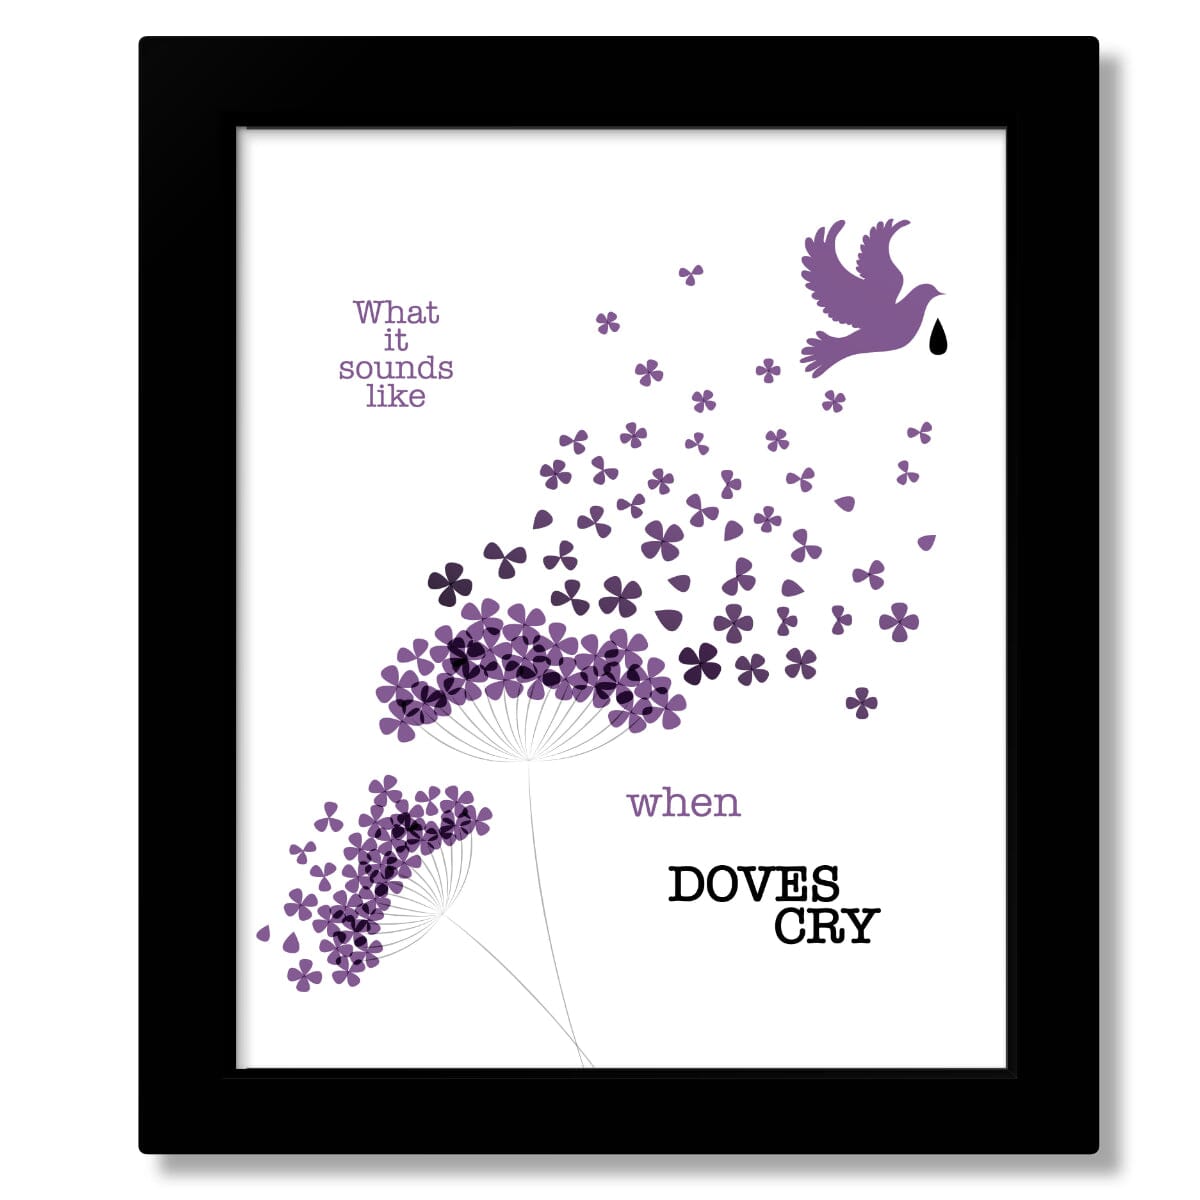 When Doves Cry by Prince - Song Lyrics Wall Art Print Poster Song Lyrics Art Song Lyrics Art 8x10 Framed Print (without mat) 